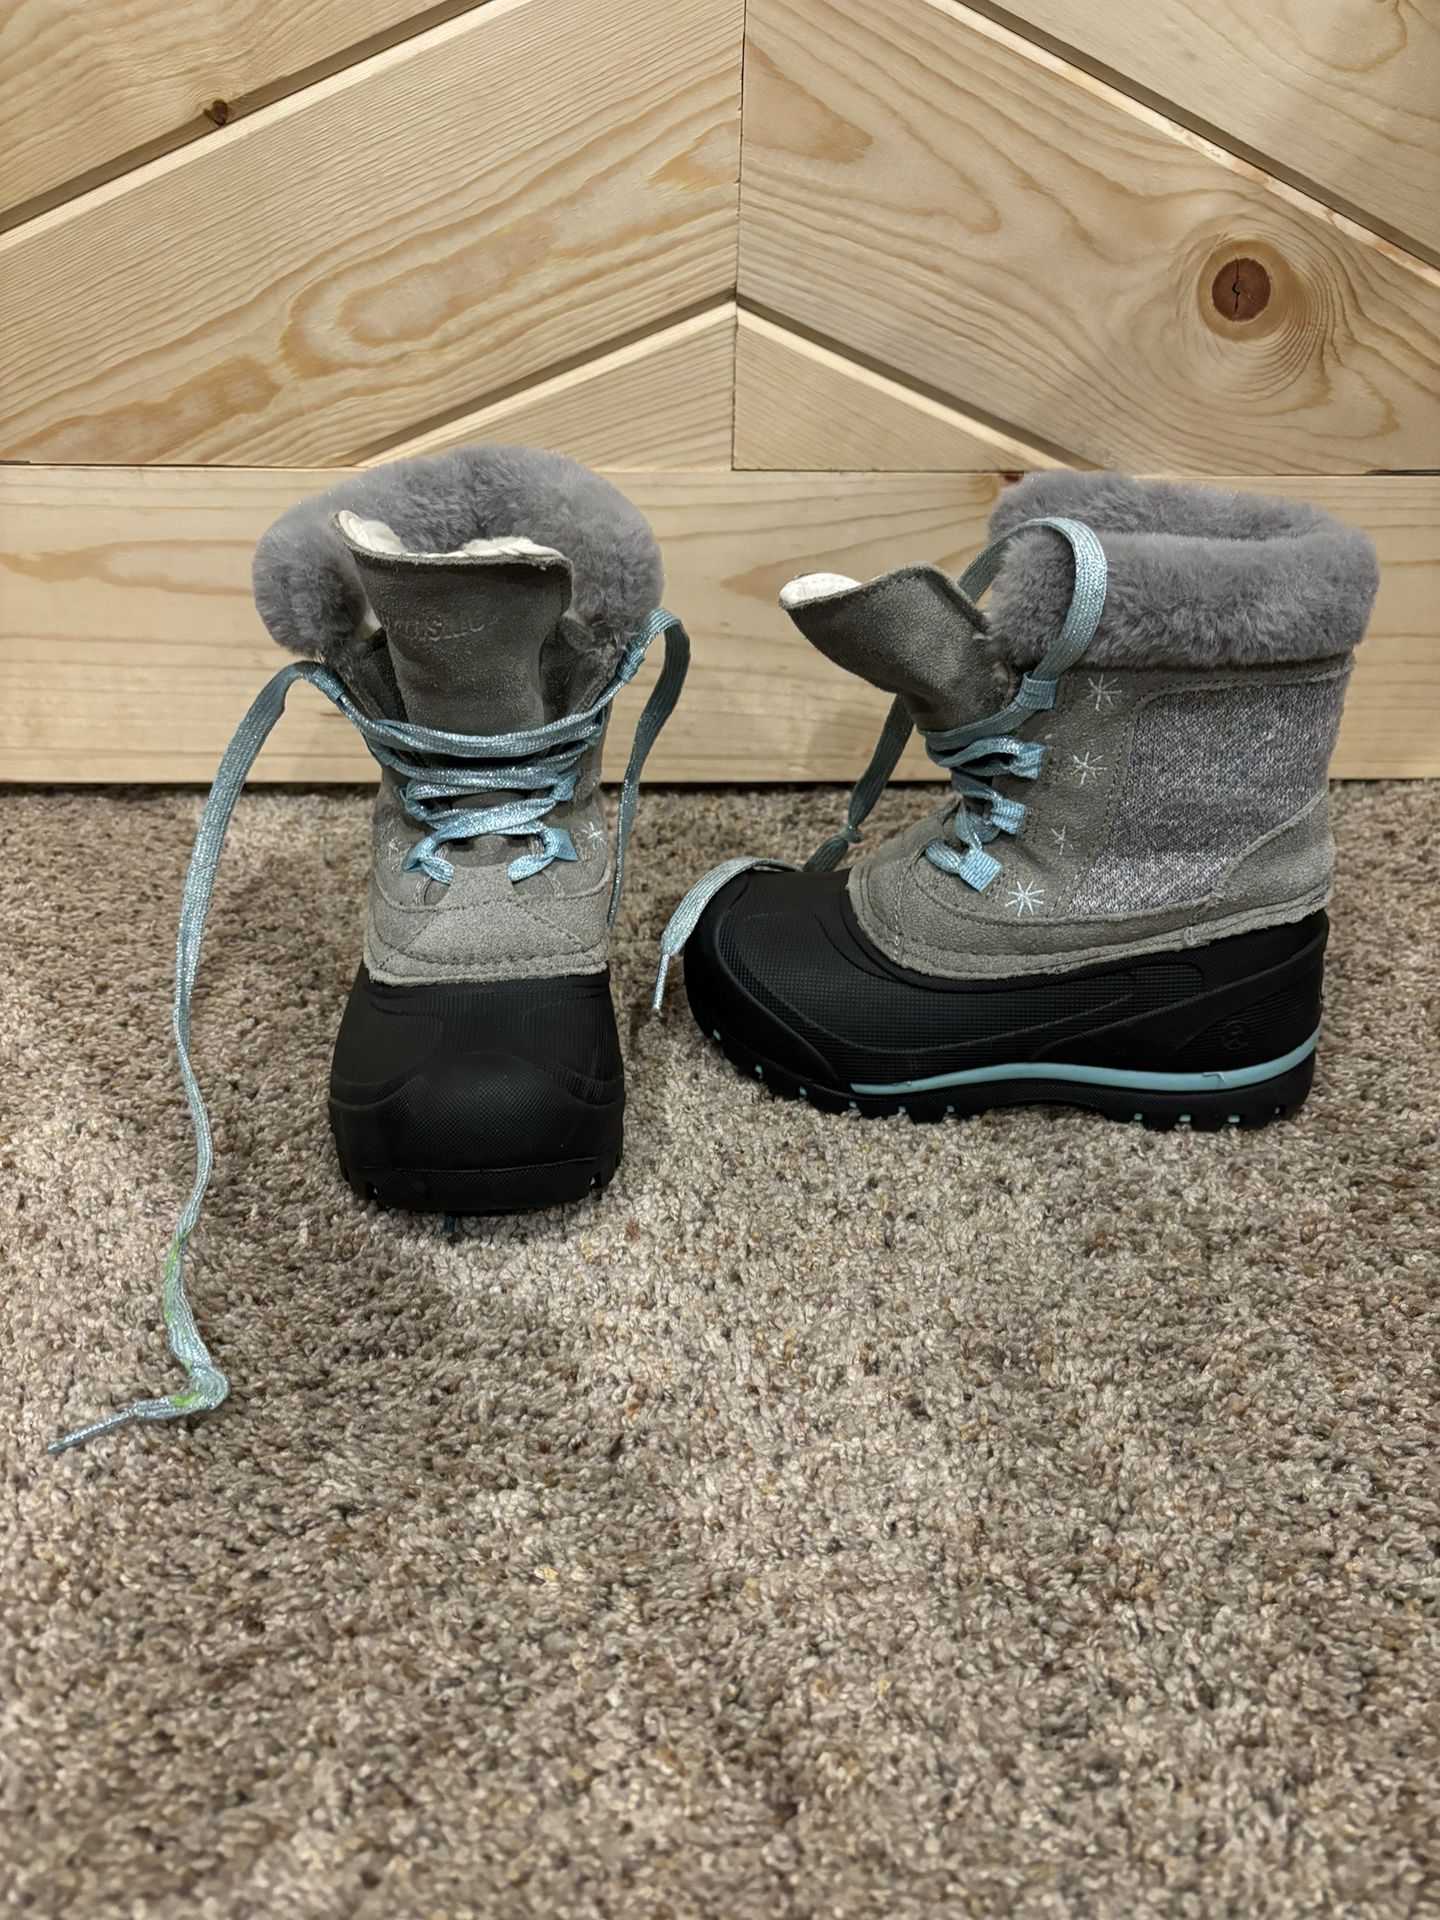 Girls Snow Boots. Size 12 Toddler